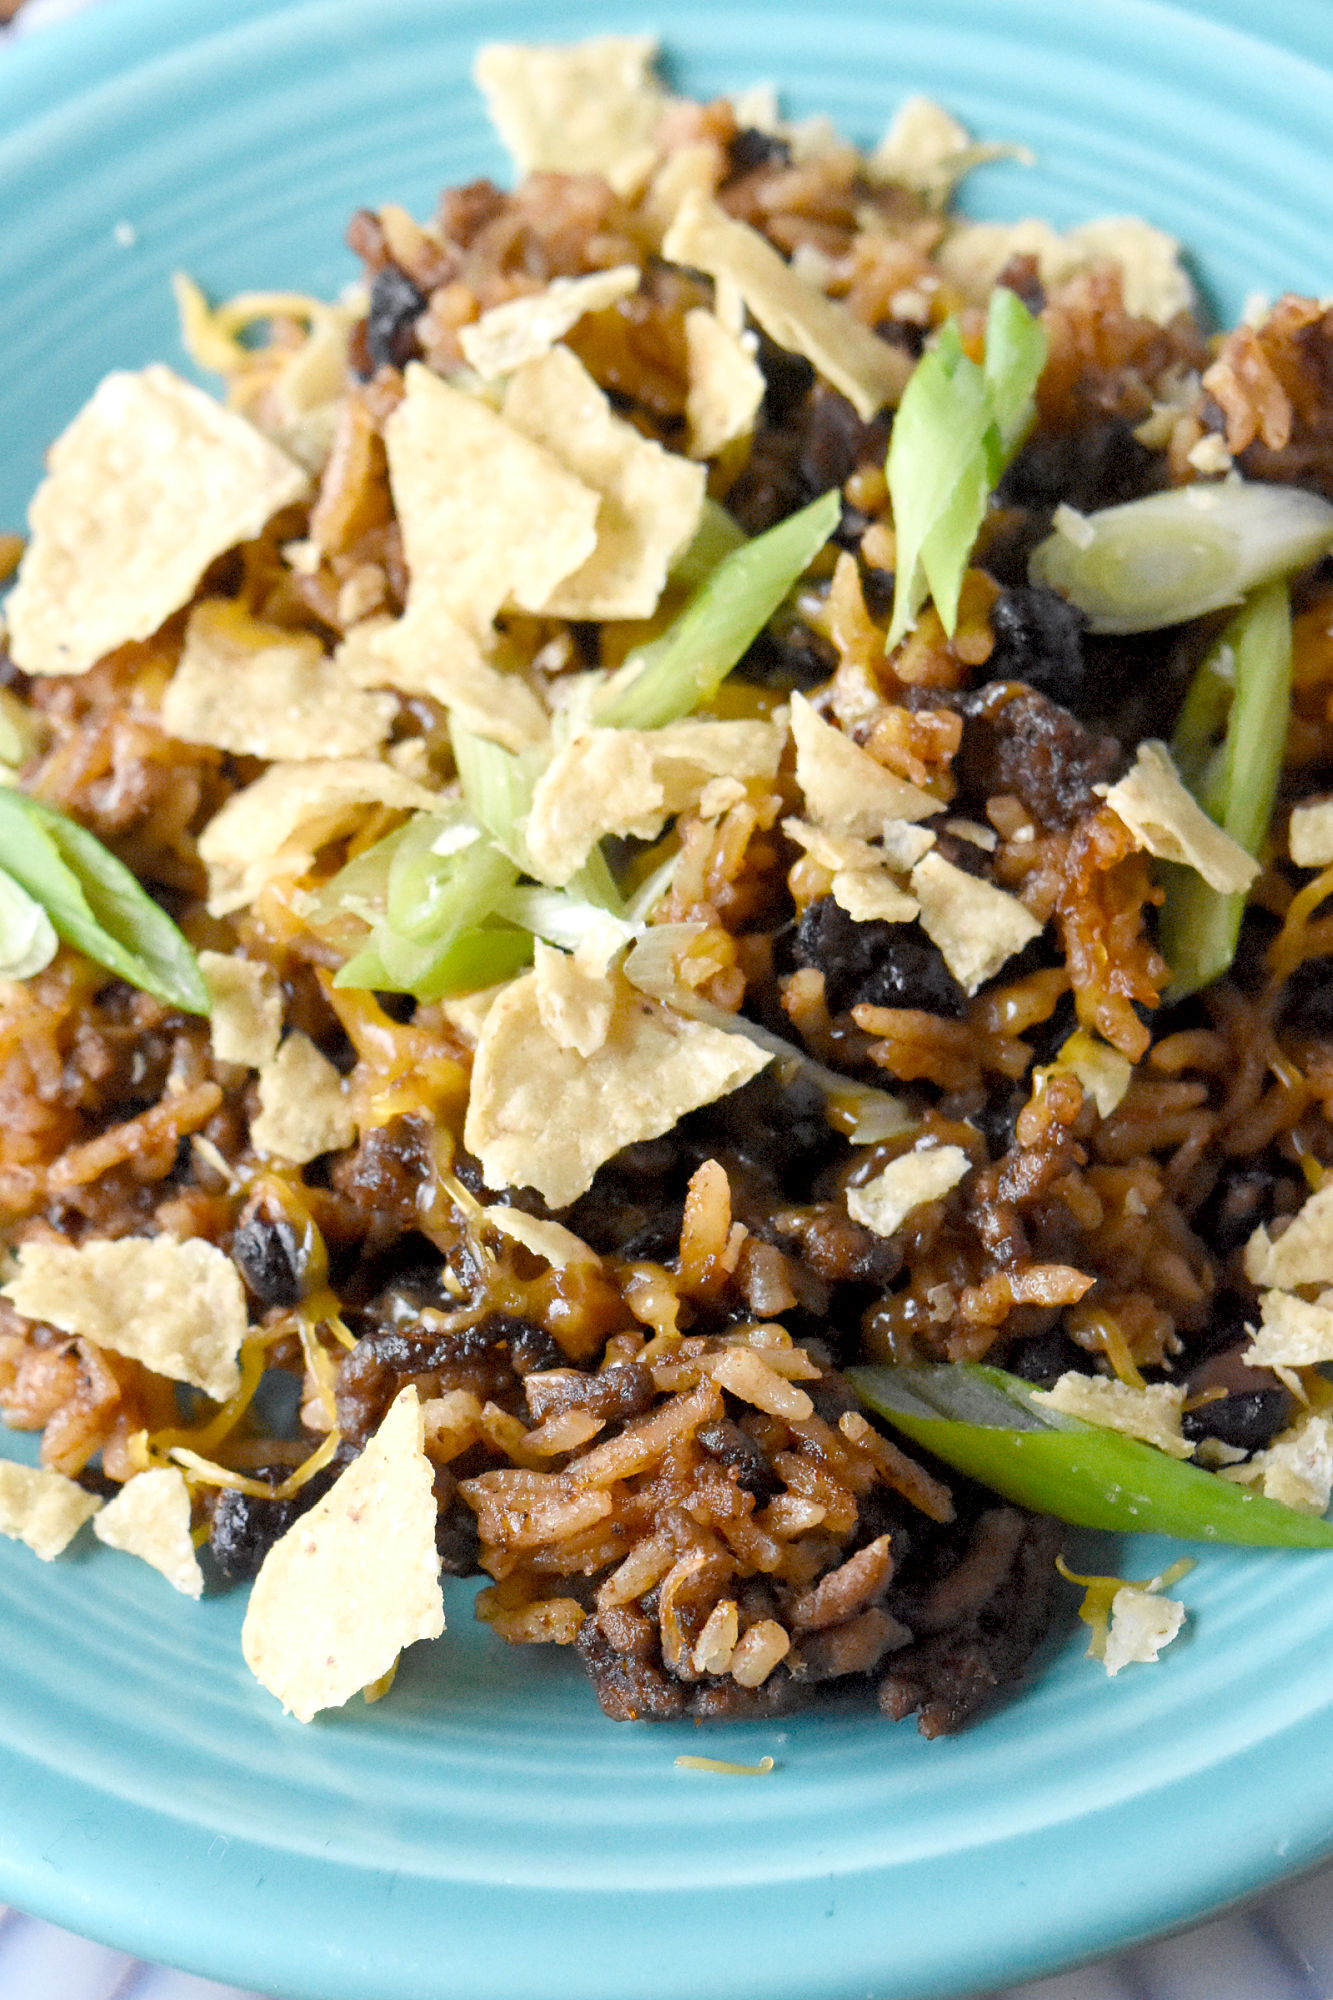 Looking for a new twist on traditional Mexican cuisine? Try out this Skillet Mexican Beef and Rice dish, packed with flavor and sure to please your taste buds! #MexicanRecipes #OnePanMeals #EasyDinnerIdeas #BeefAndRice #SkilletCooking 🍴🌶️ #MexicanFlavors #BeefAndRice
